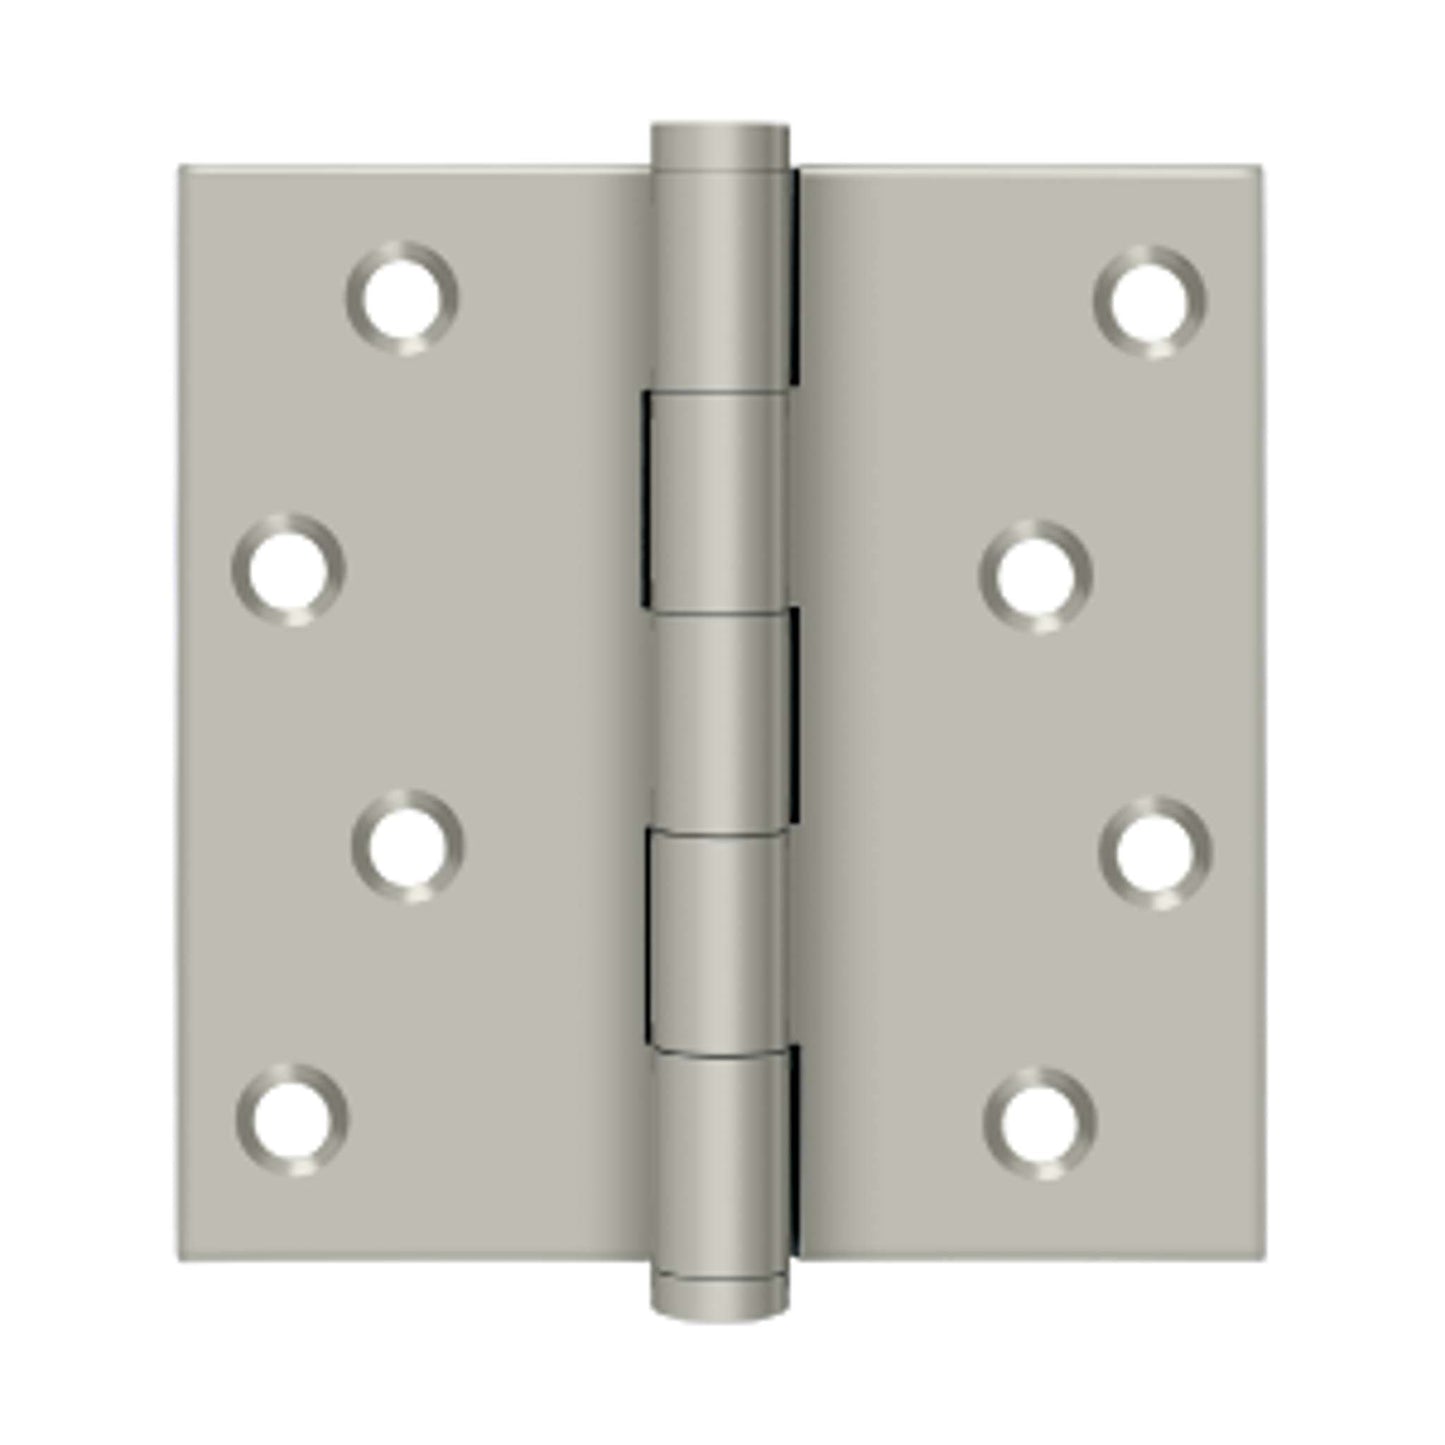 Deltana - 4" x 4" Square Hinges Residential / Zig-Zag, Solid Brass Hinges